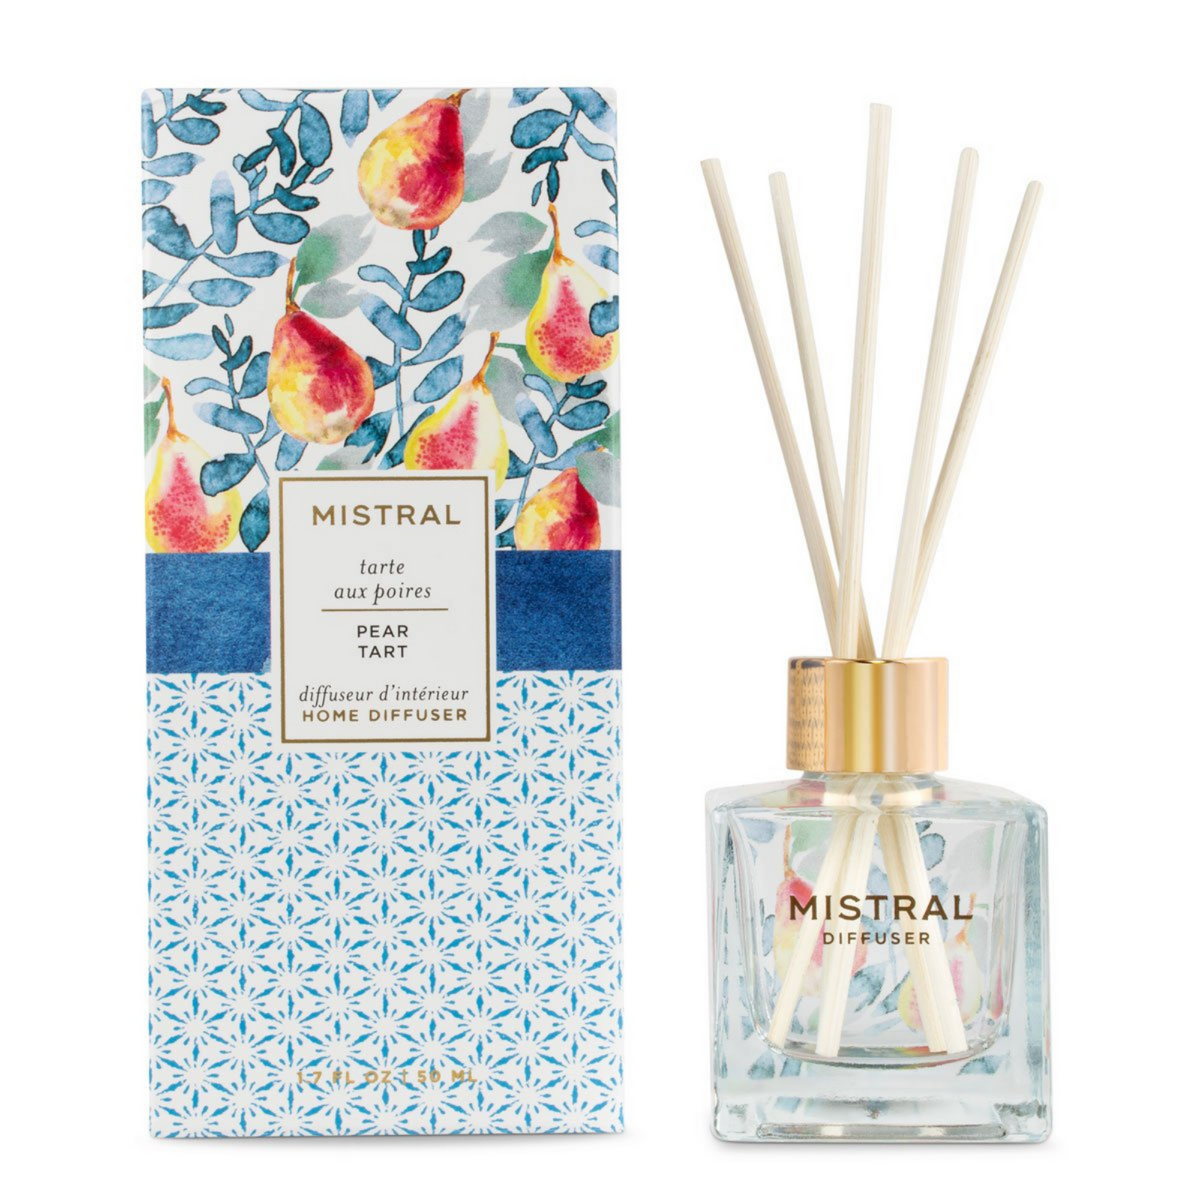 Primary Image of Pear Tart Reed Diffuser